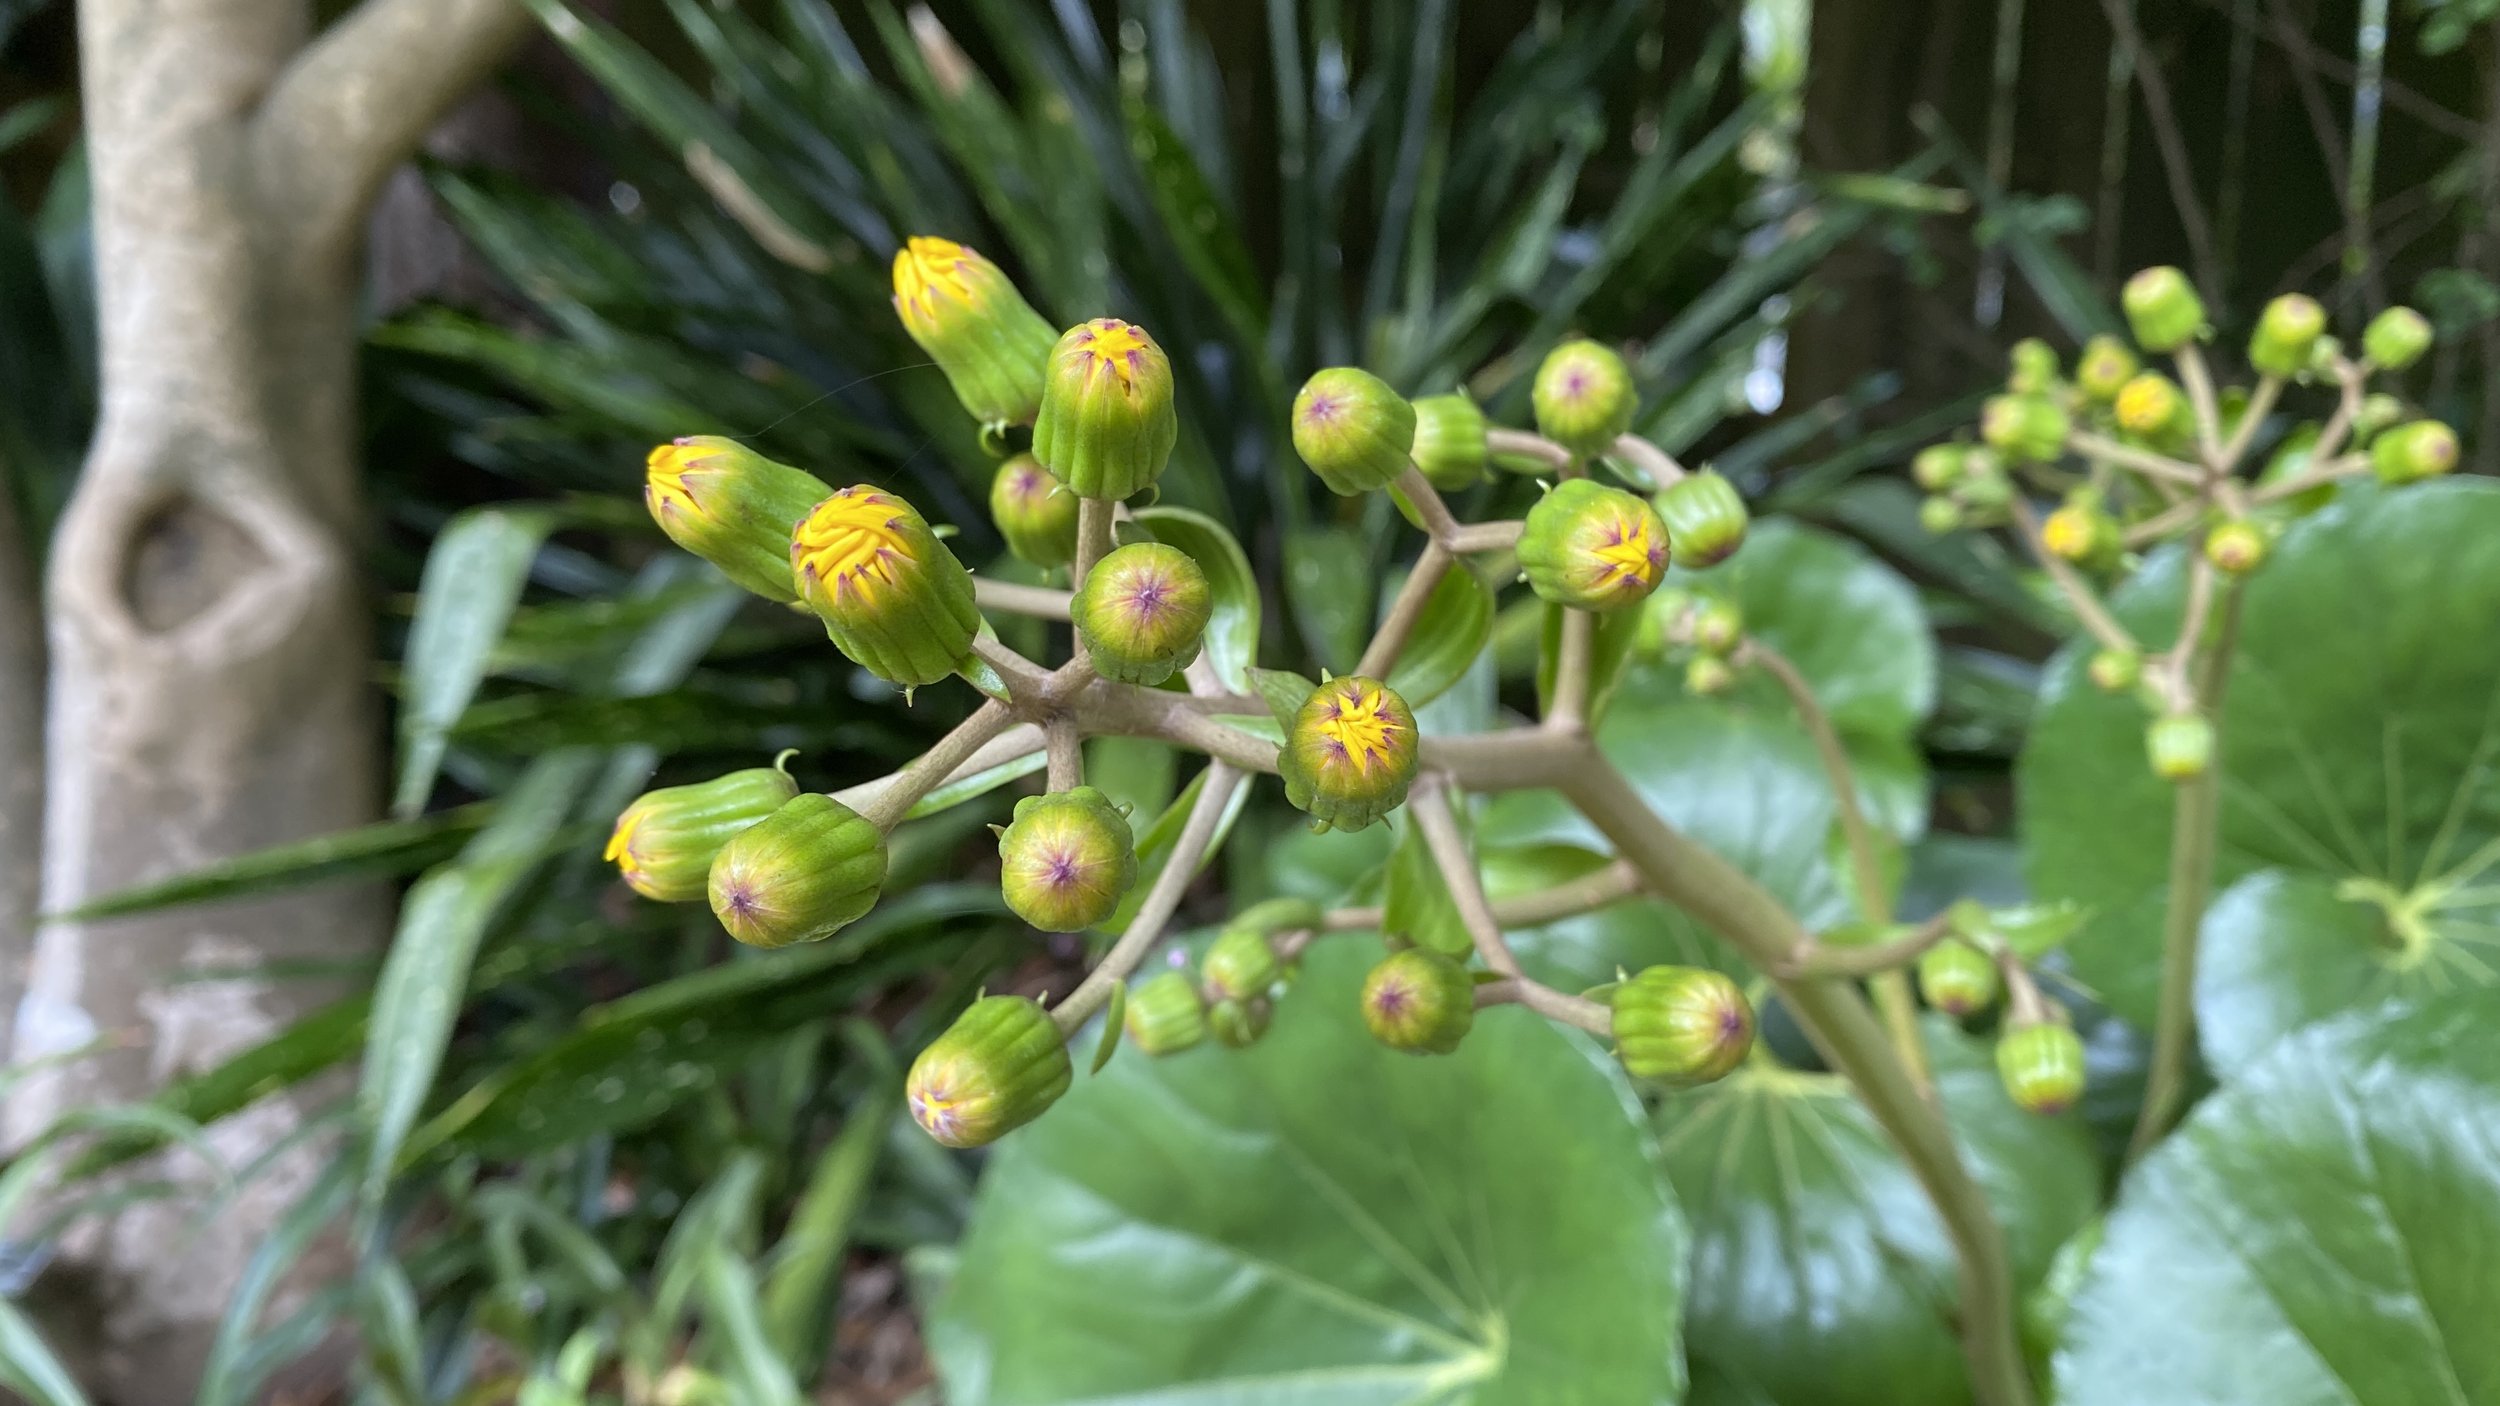  Finally!  Flowers of  Ligularia tussilaginea  ‘Gigantea’ (giant leopard plant) take their sweet time to develop, much less open.  These usually escape even a moderate frost, as the plant is protected by the dense evergreen canopy of  Camellia saluen